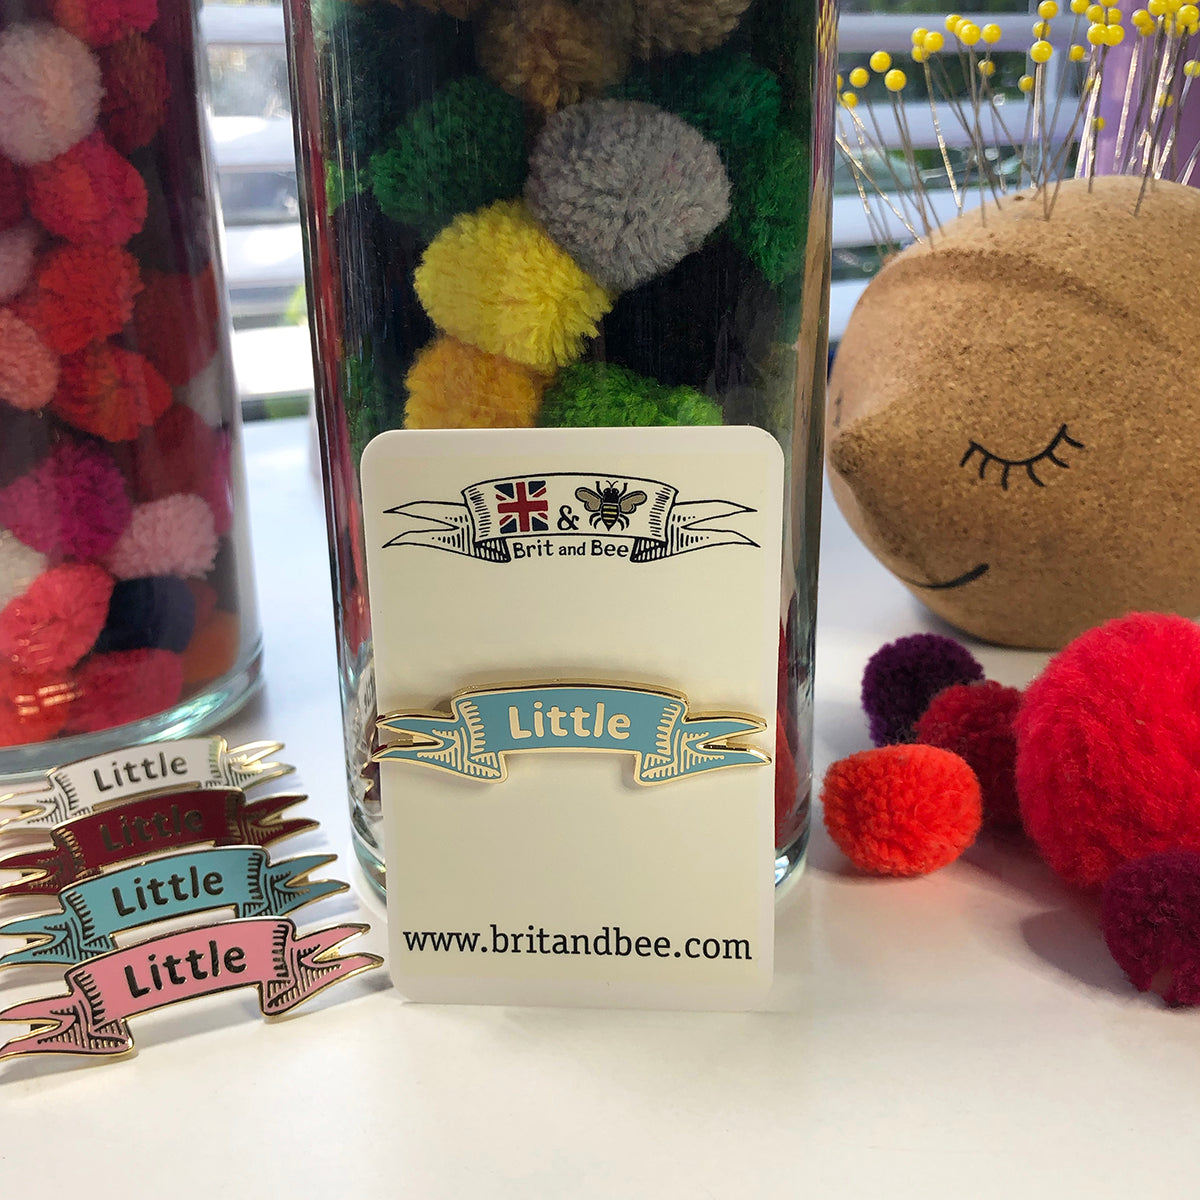 Little Pin | Brit and Bee